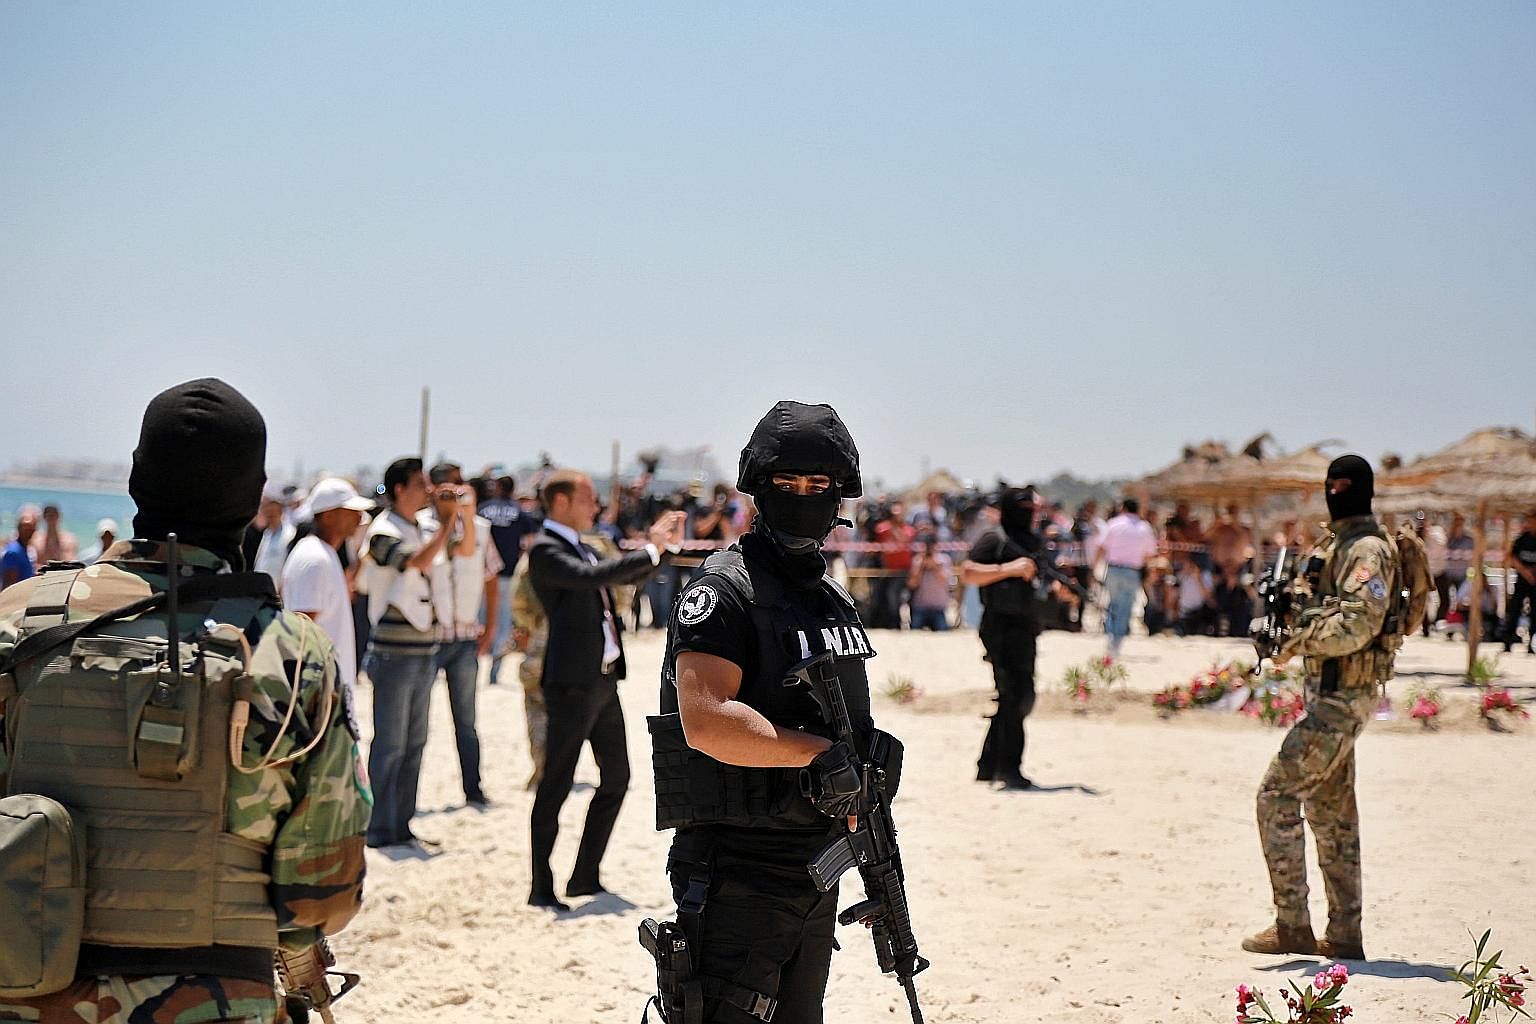 Tunisian security forces at a wreath-laying ceremony on Monday for victims of the shooting at a beach resort in Sousse, near Tunis. Addressing the root causes of extremism might help persuade those susceptible to radicalisation that they have a stake